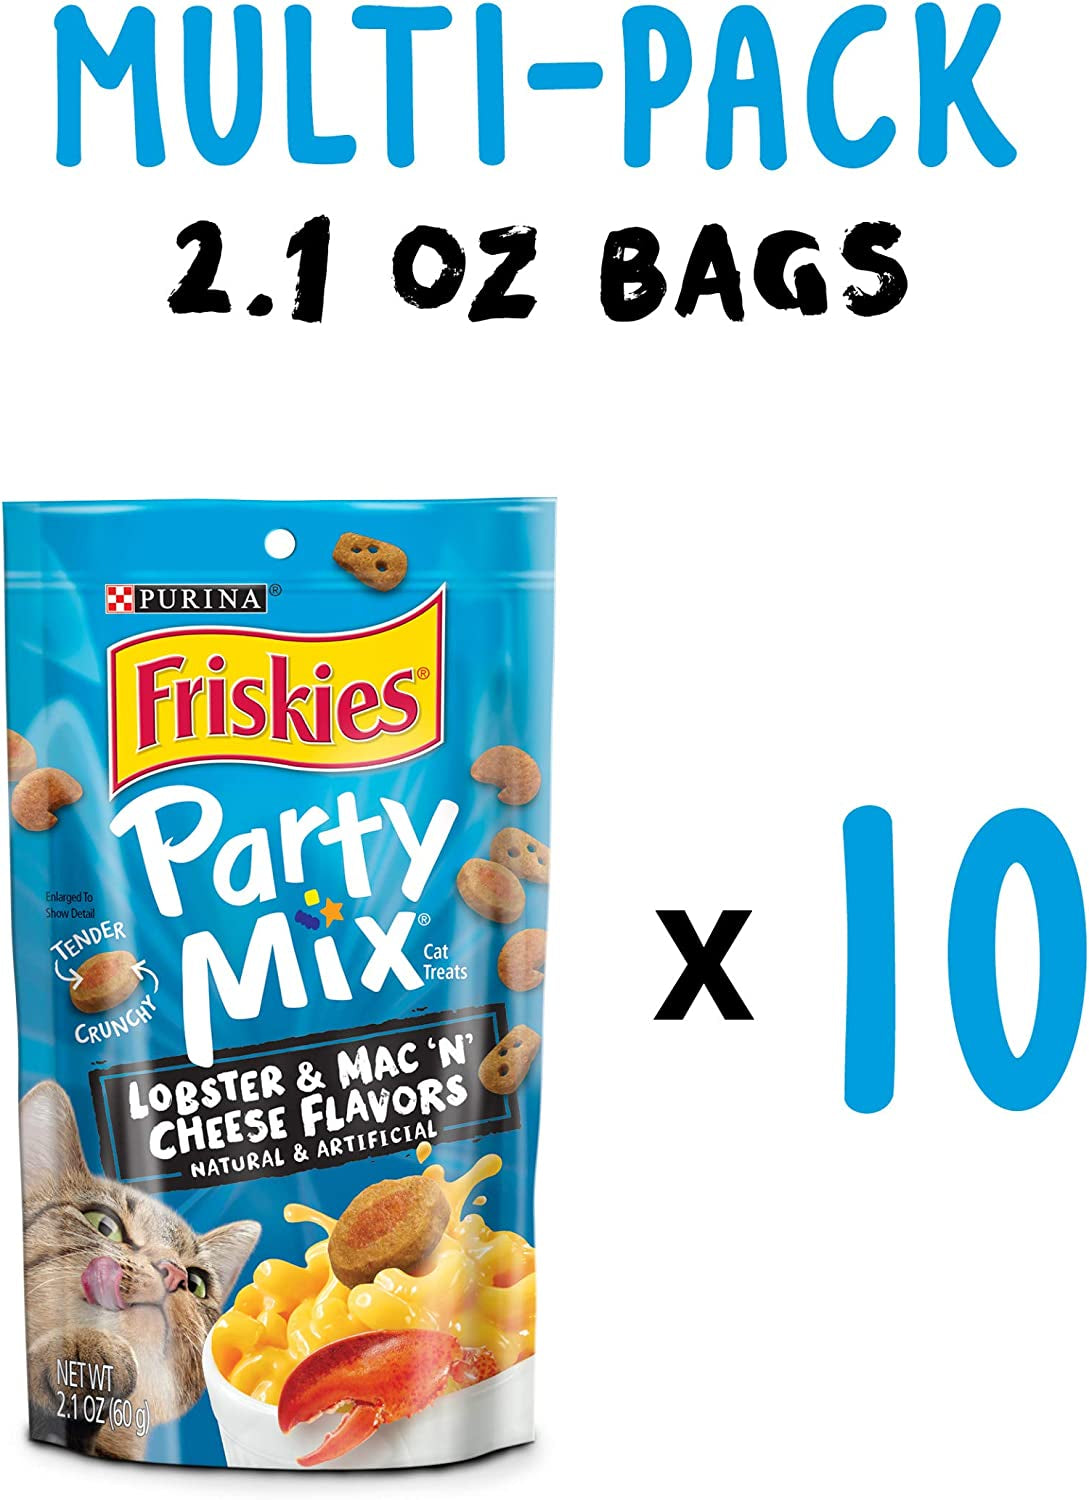 Purina Friskies Made in USA Facilities Cat Treats, Party Mix Lobster & Mac 'N' Cheese Flavors - (10) 2.1 Oz. Pouches